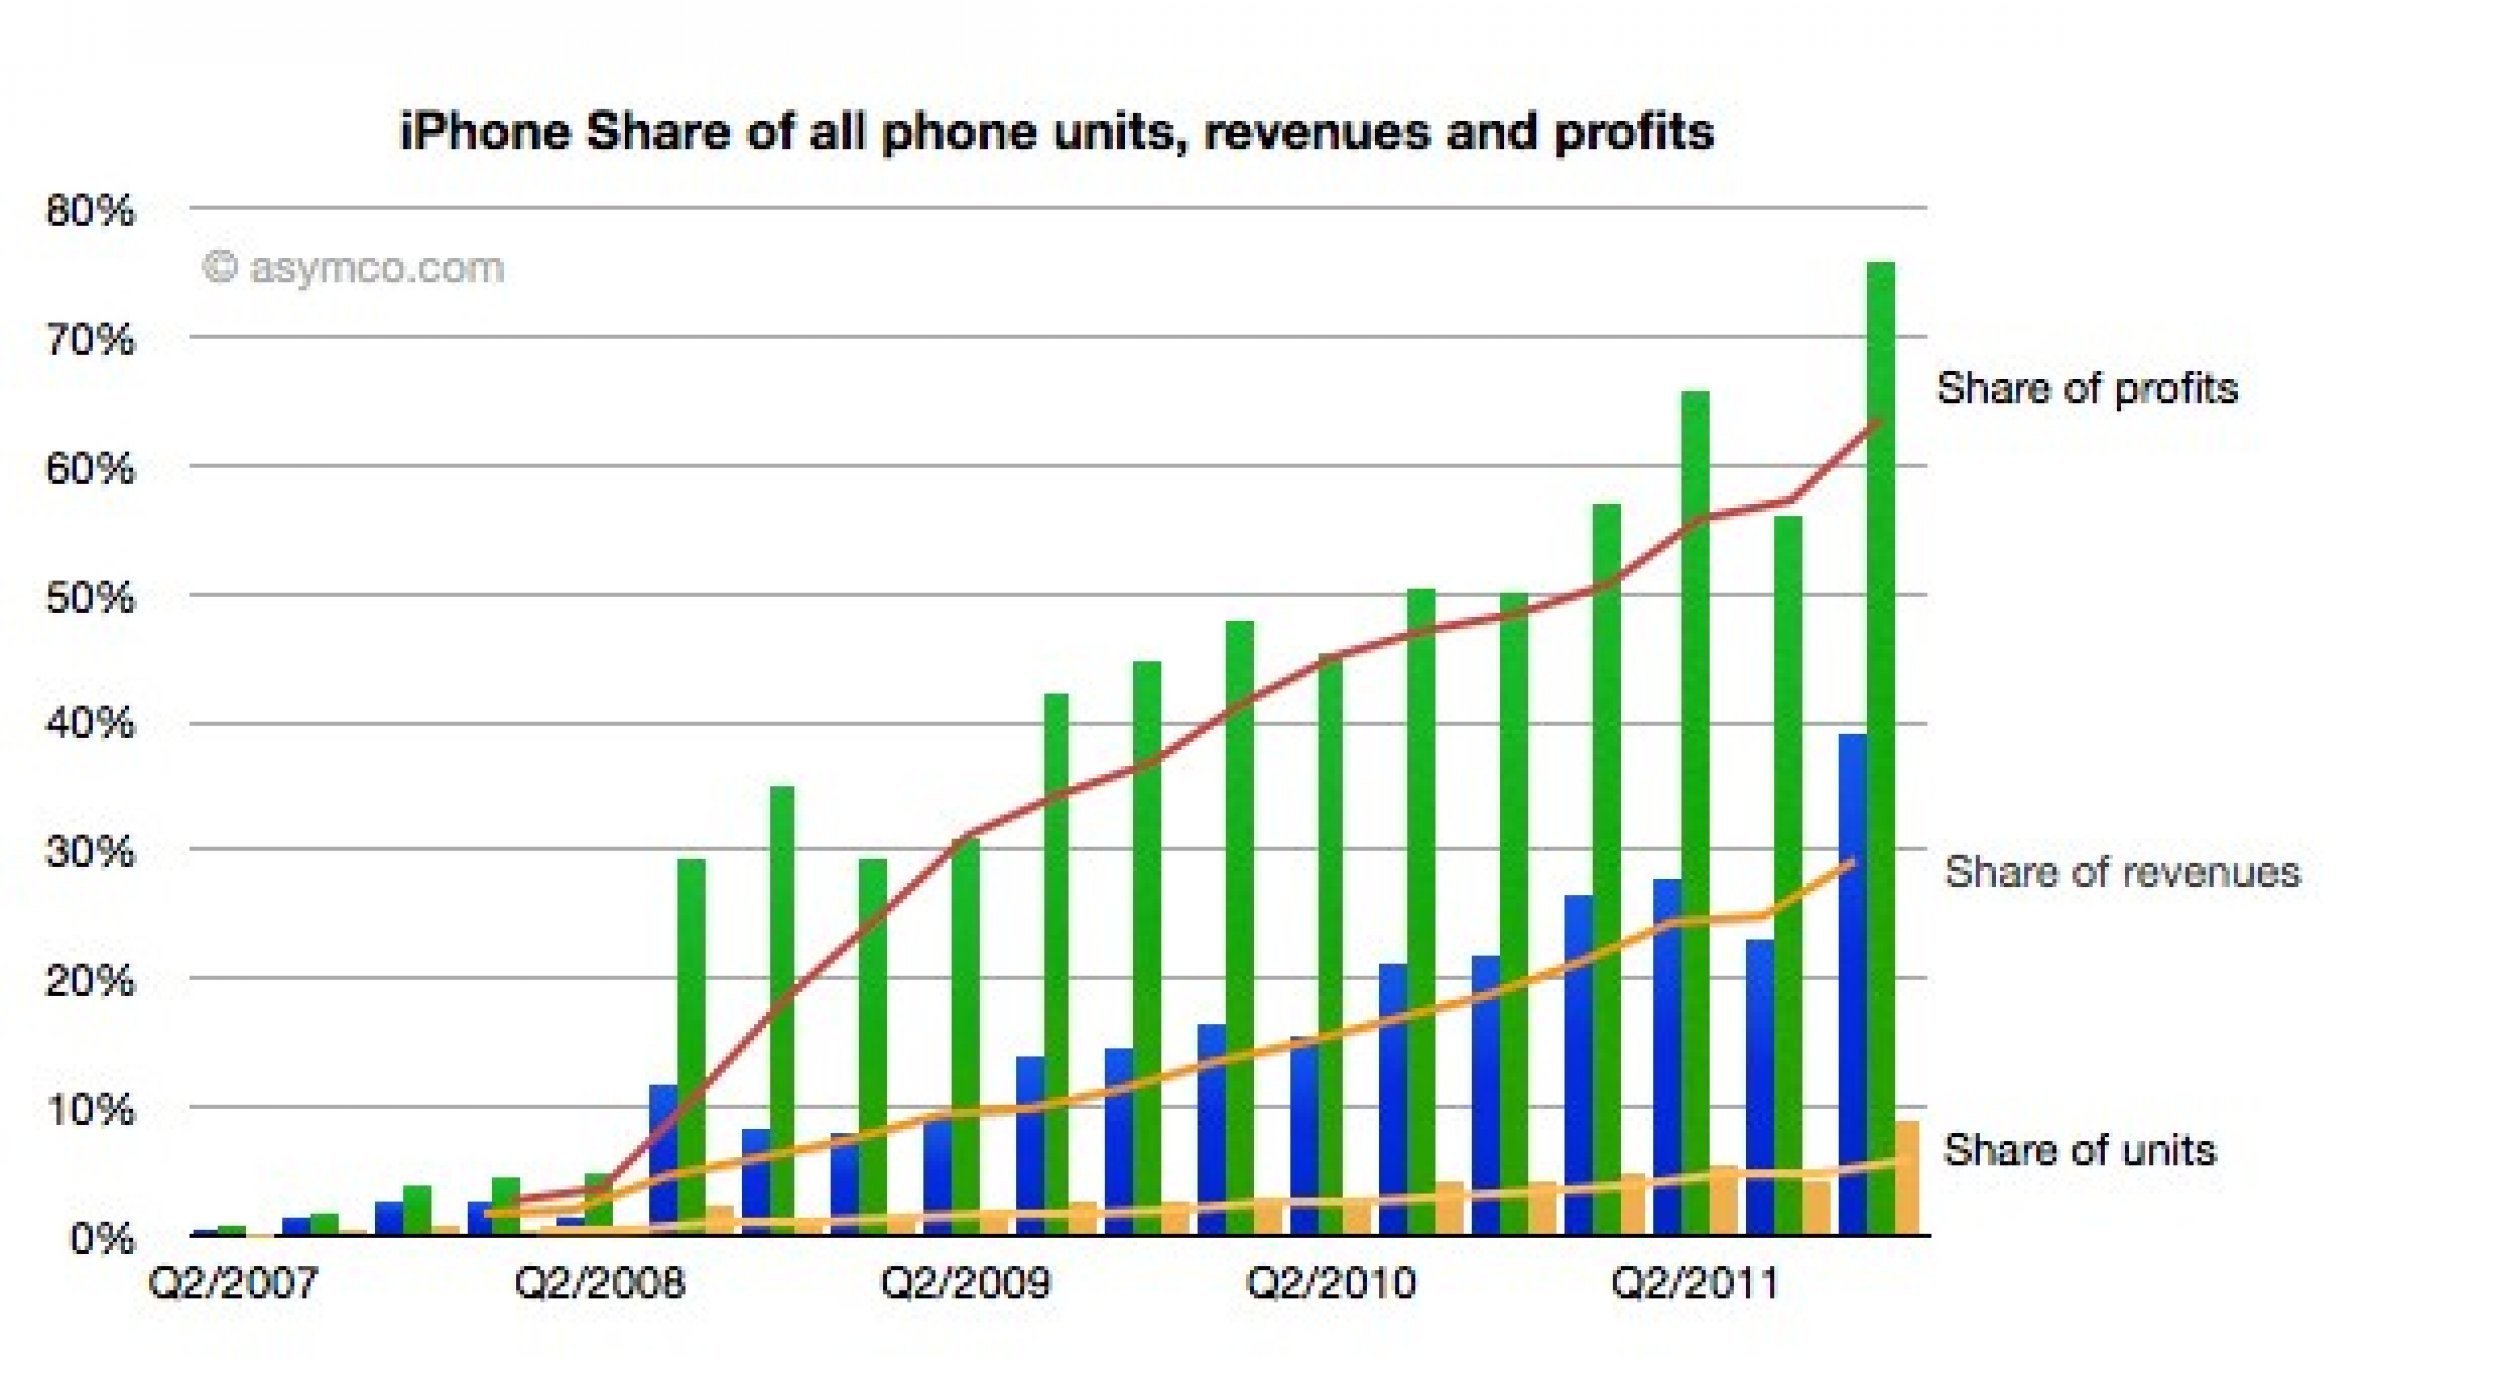 iPhone Share of all phone unit, revenues and profits